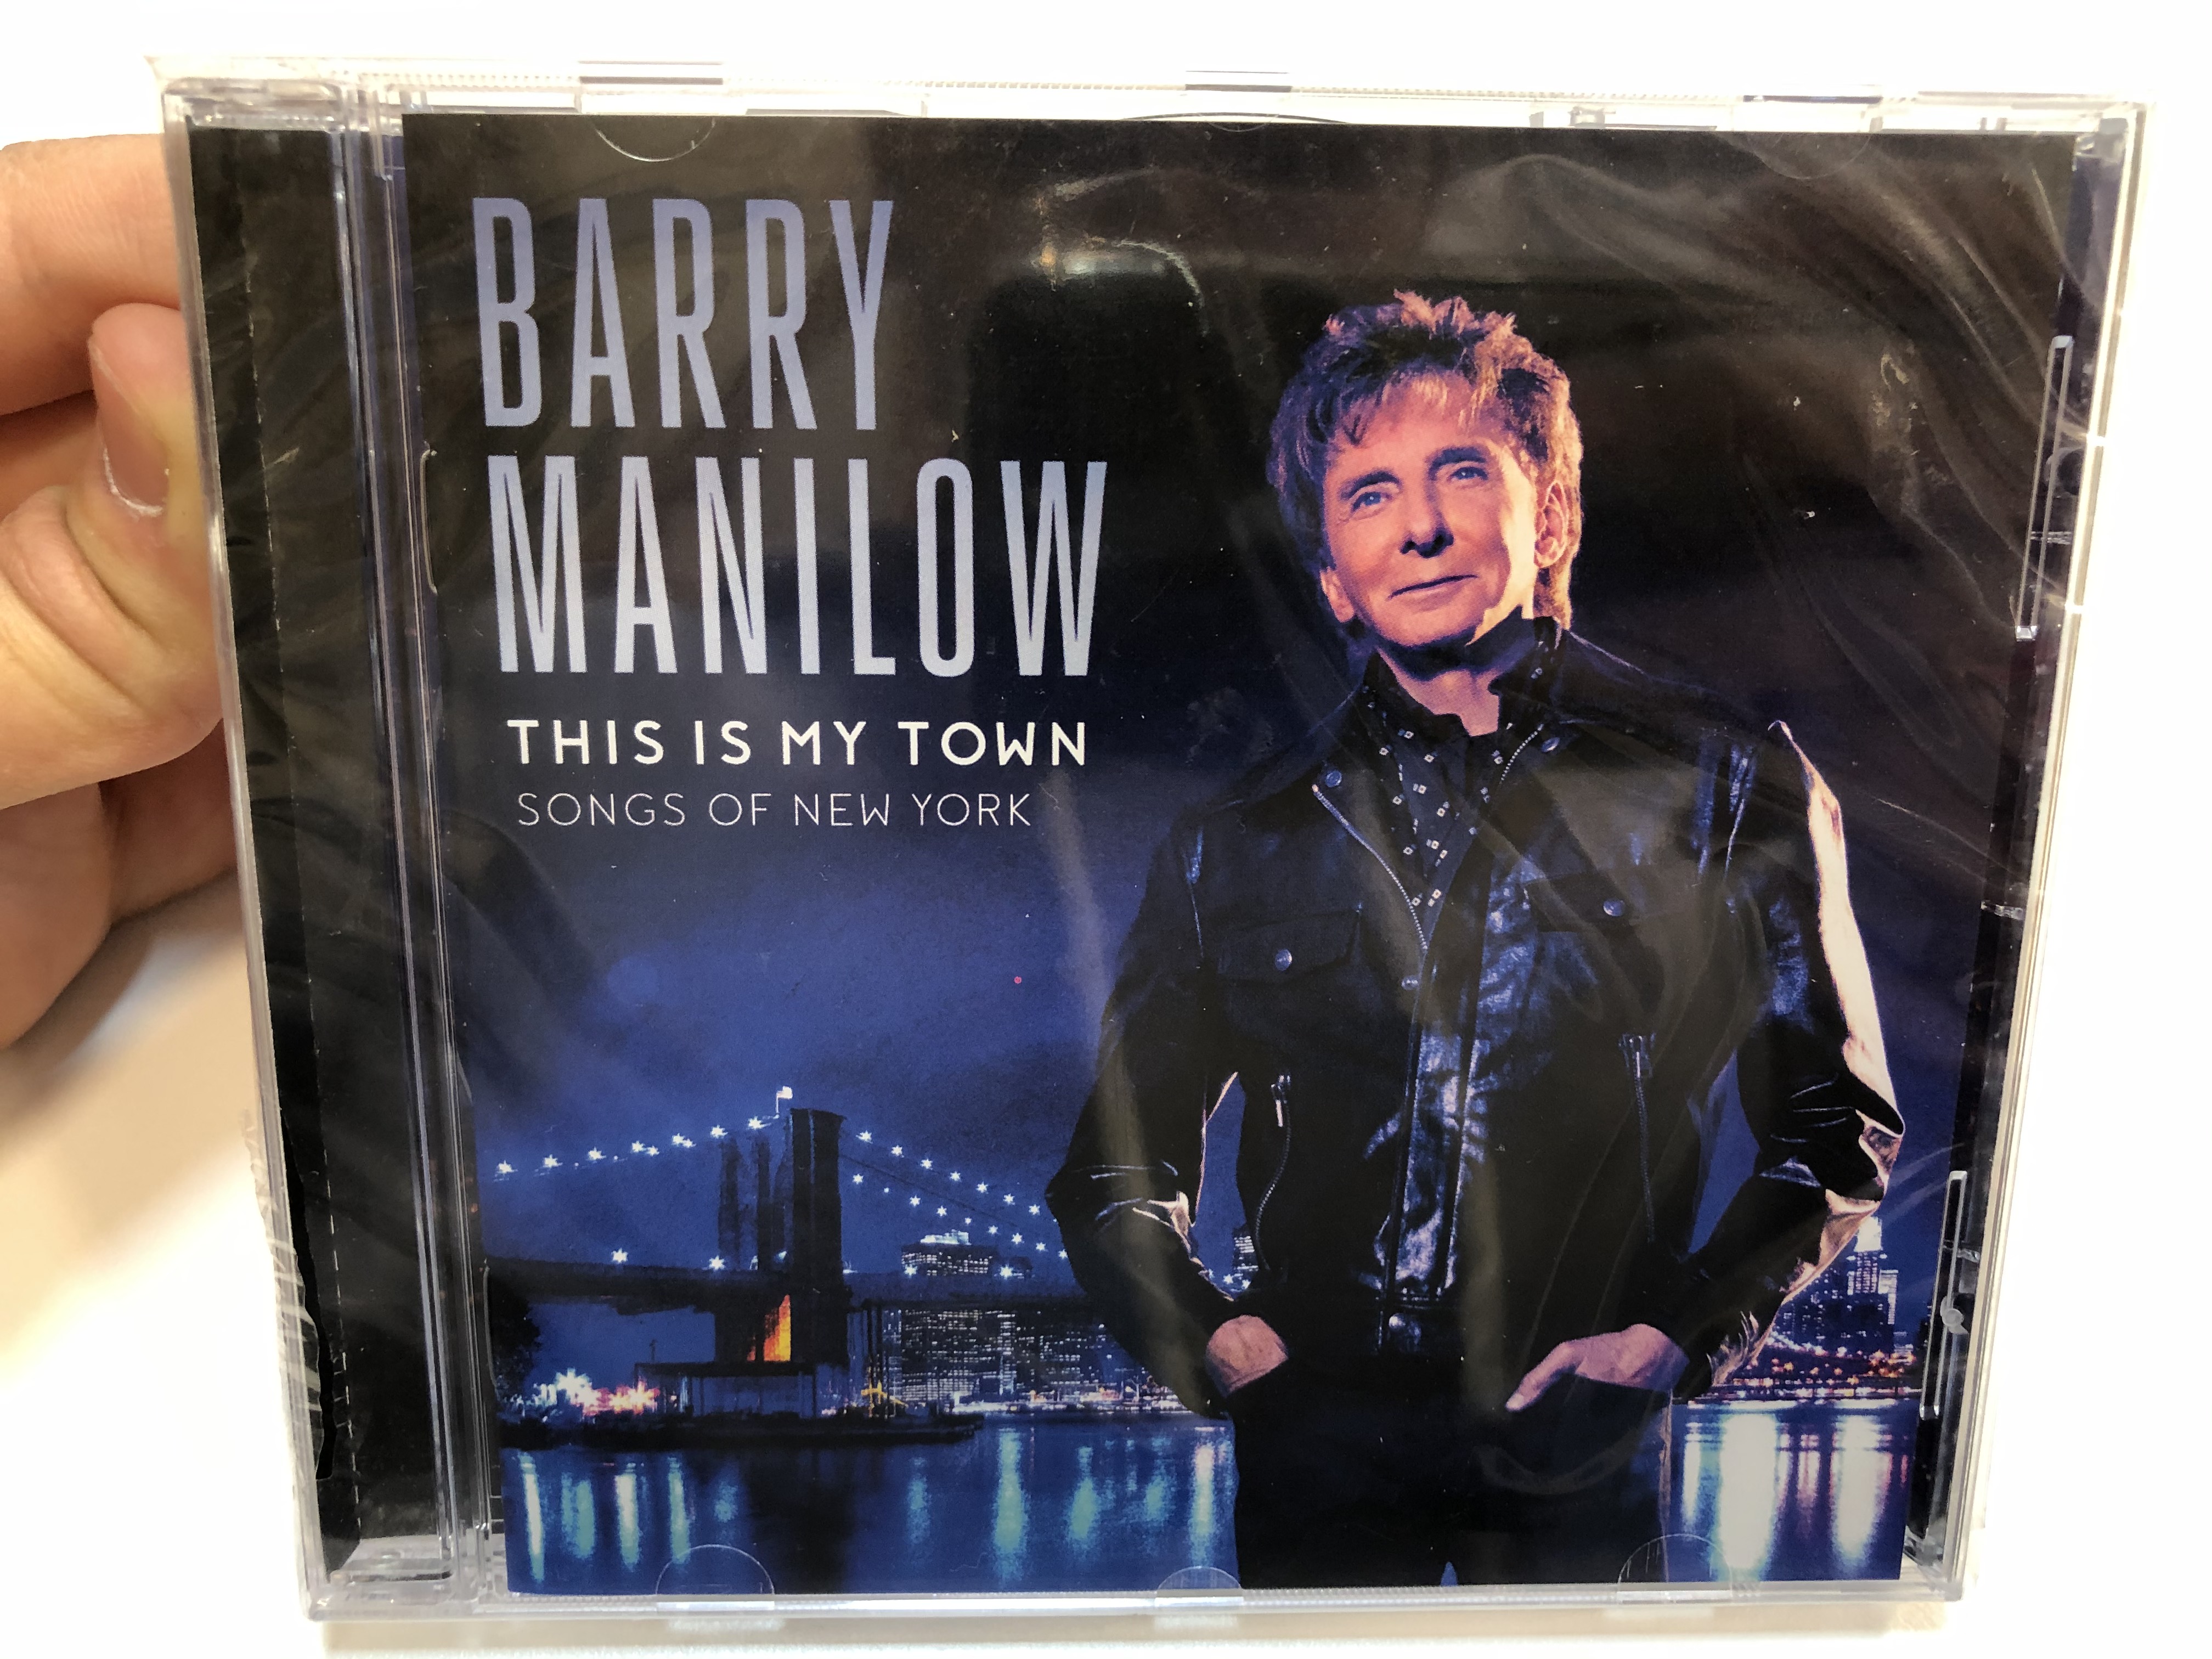 barry-manilow-this-is-my-town-songs-of-new-york-decca-audio-cd-2017-00602557341461-1-.jpg